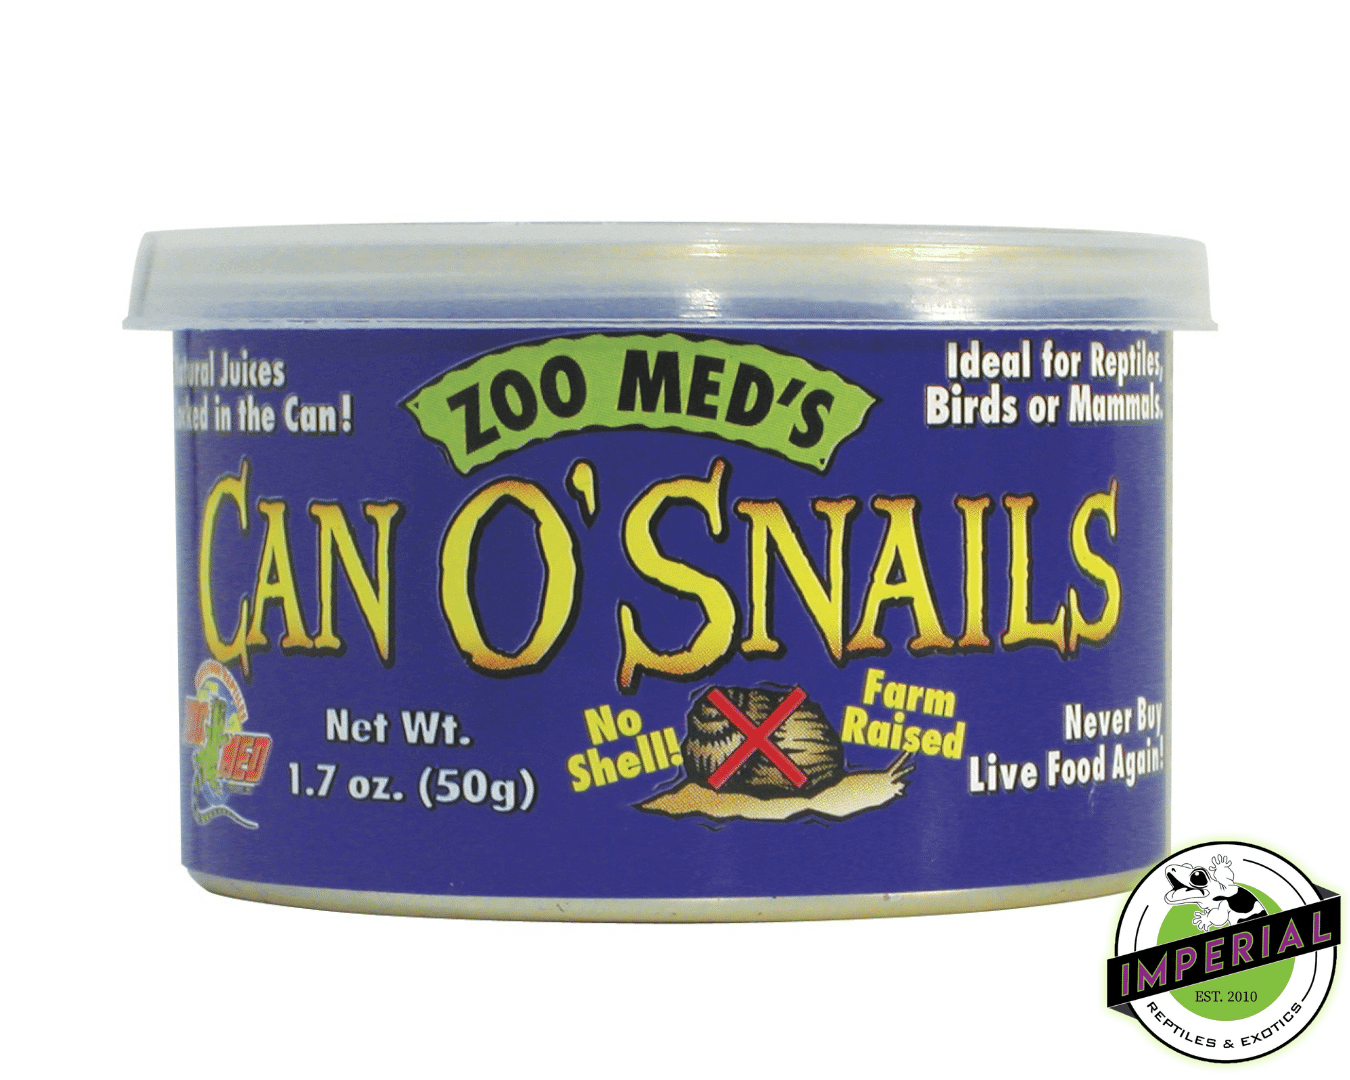 Buy canned un-shelled snails for sale online at cheap prices.